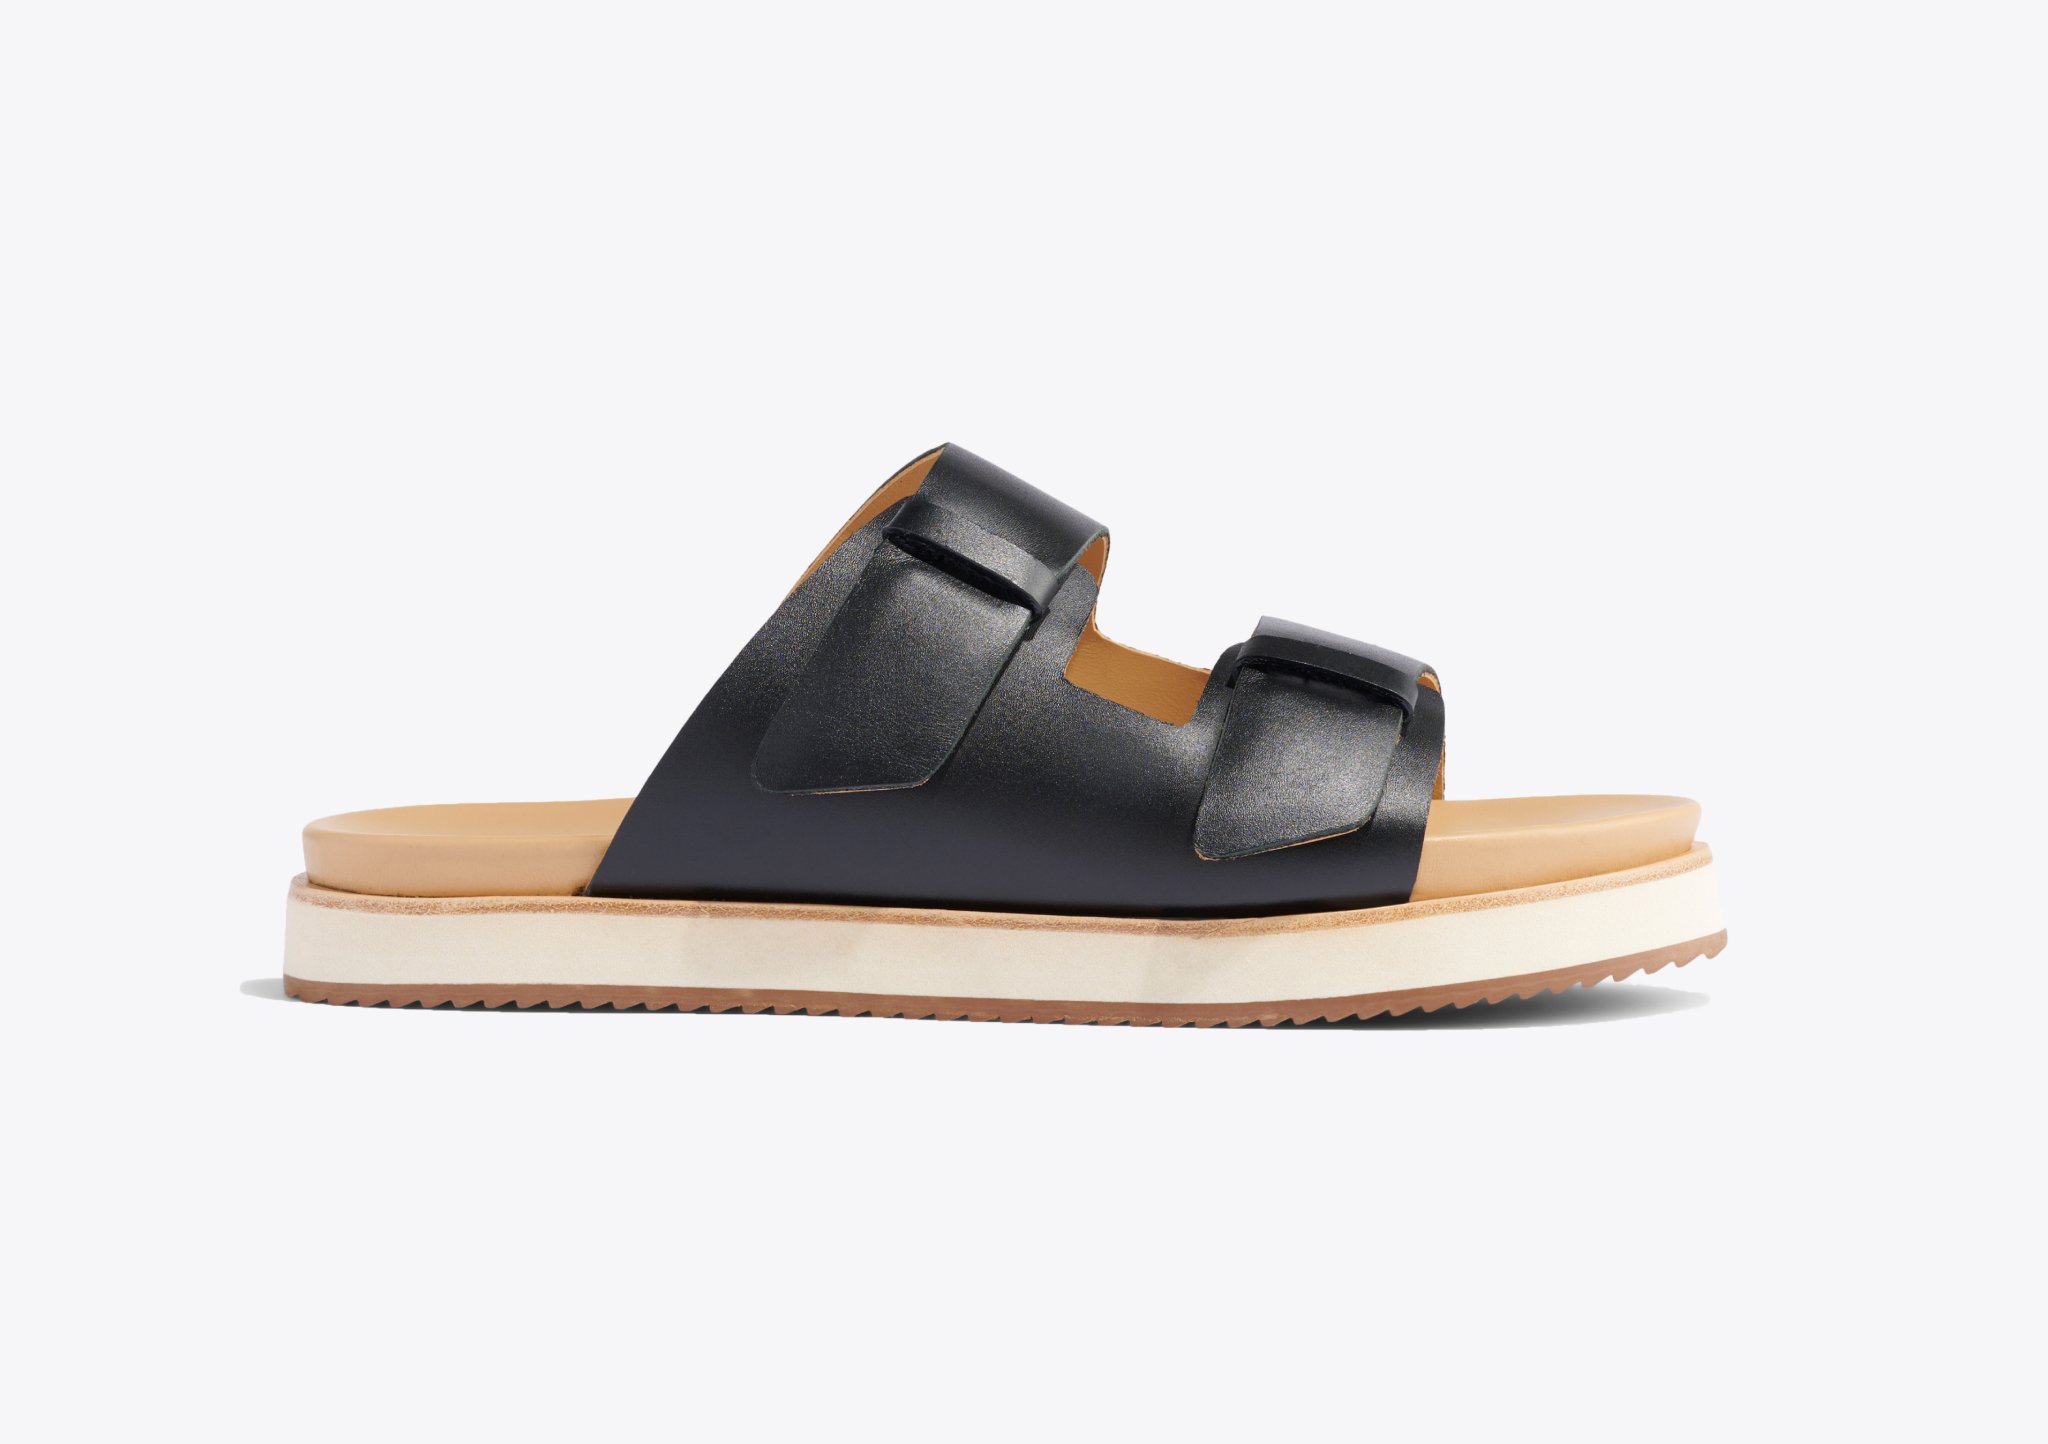 Nisolo Ella Flatform Slide Black - Every Nisolo product is built on the foundation of comfort, function, and design. 